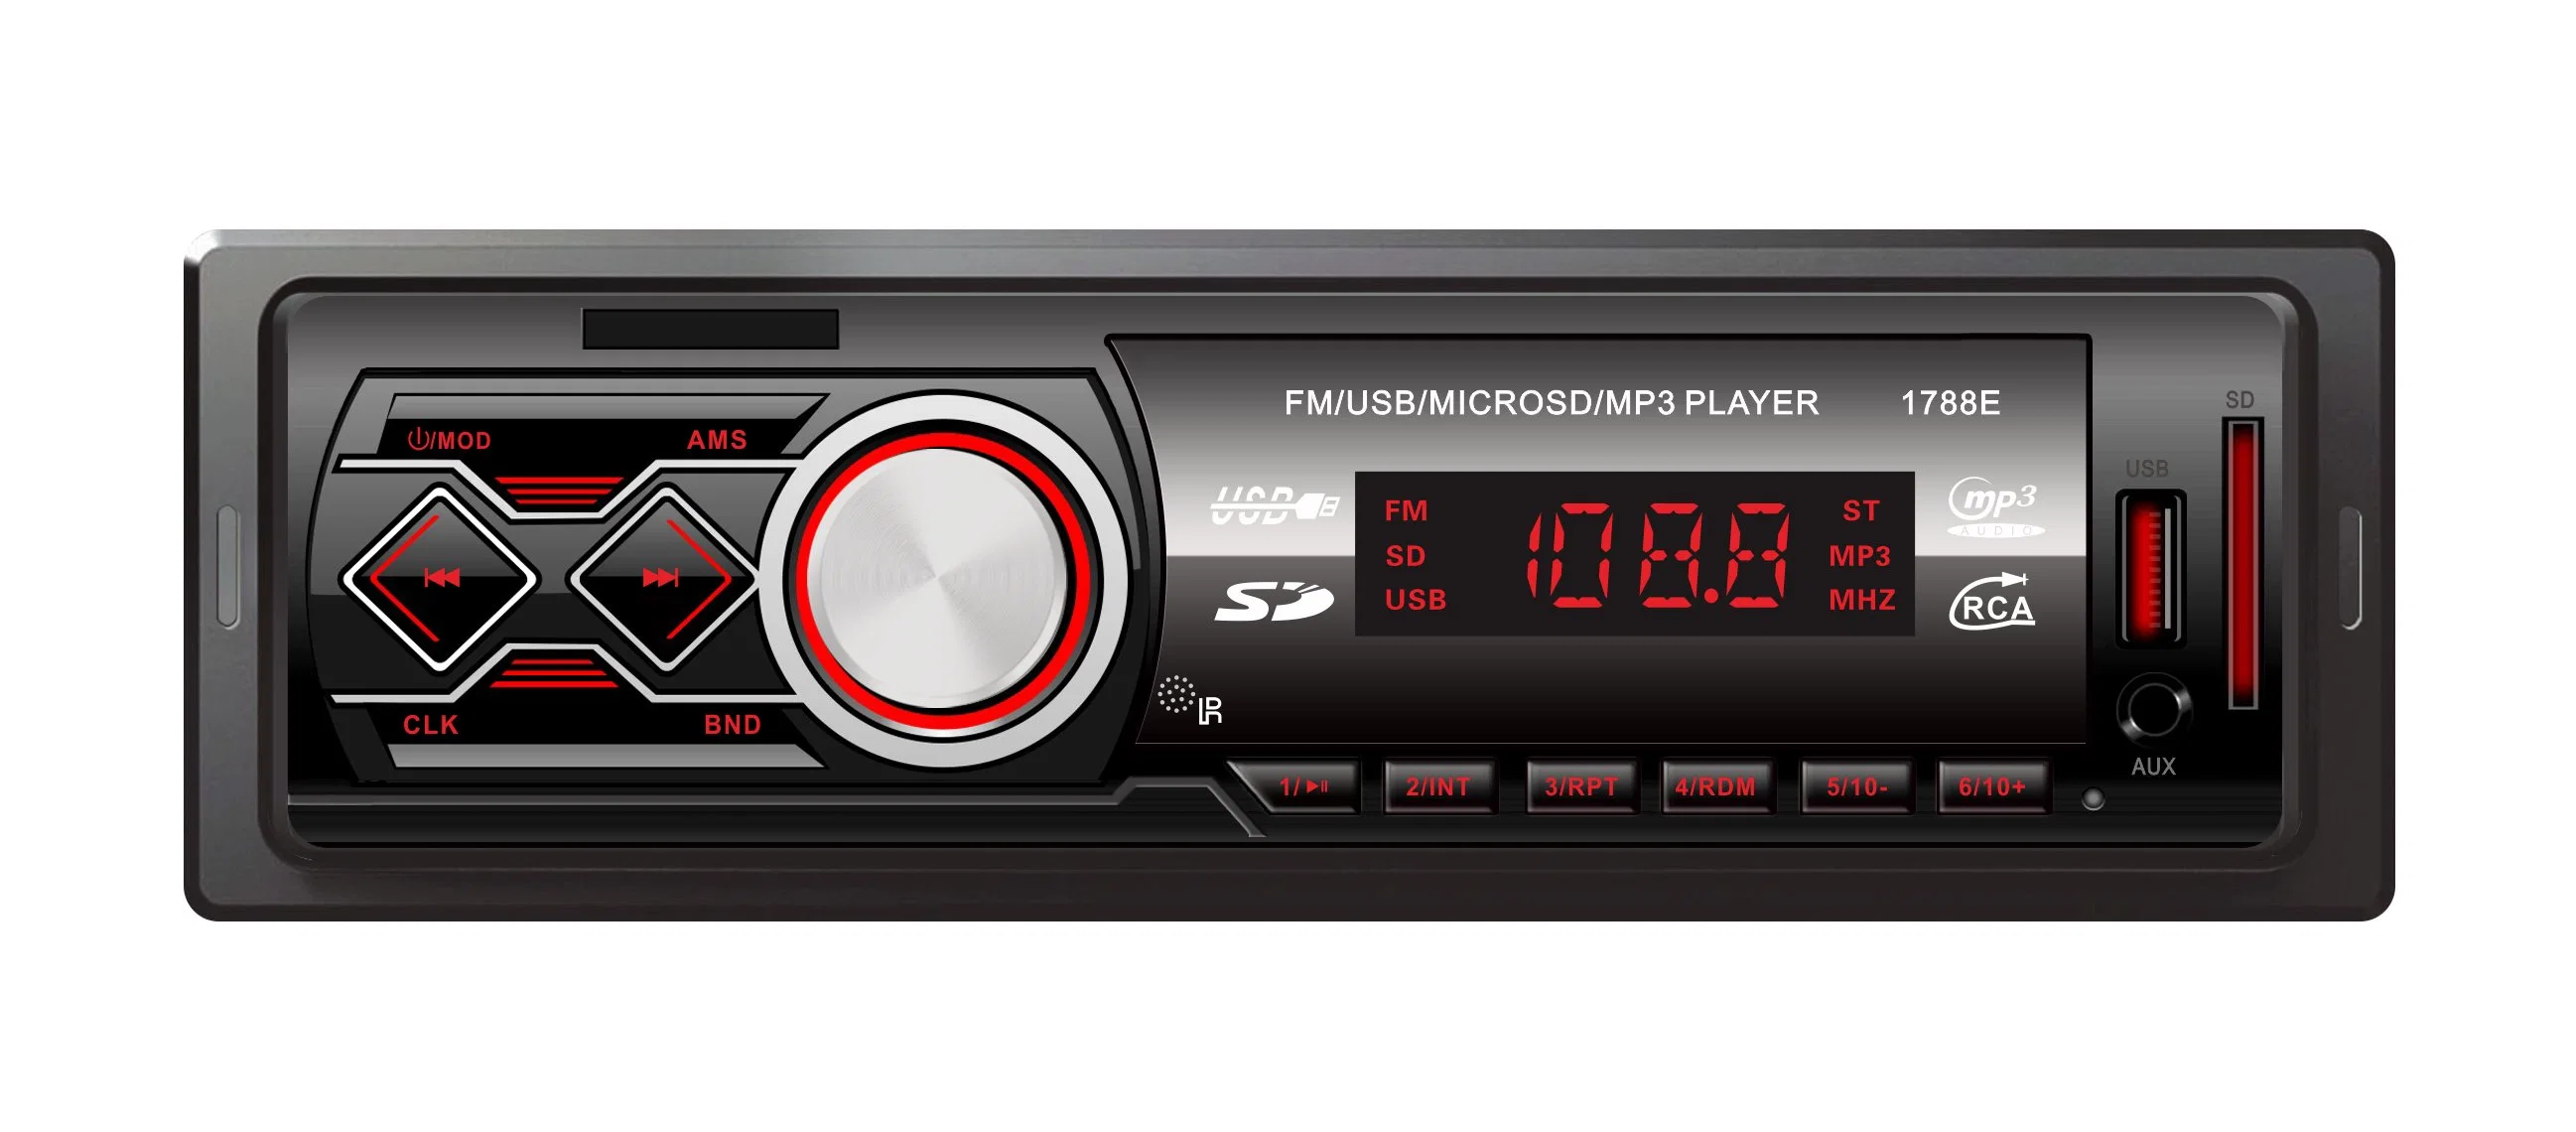 Car Stereo MP3 Music Audio Player with USB/FM/Bt